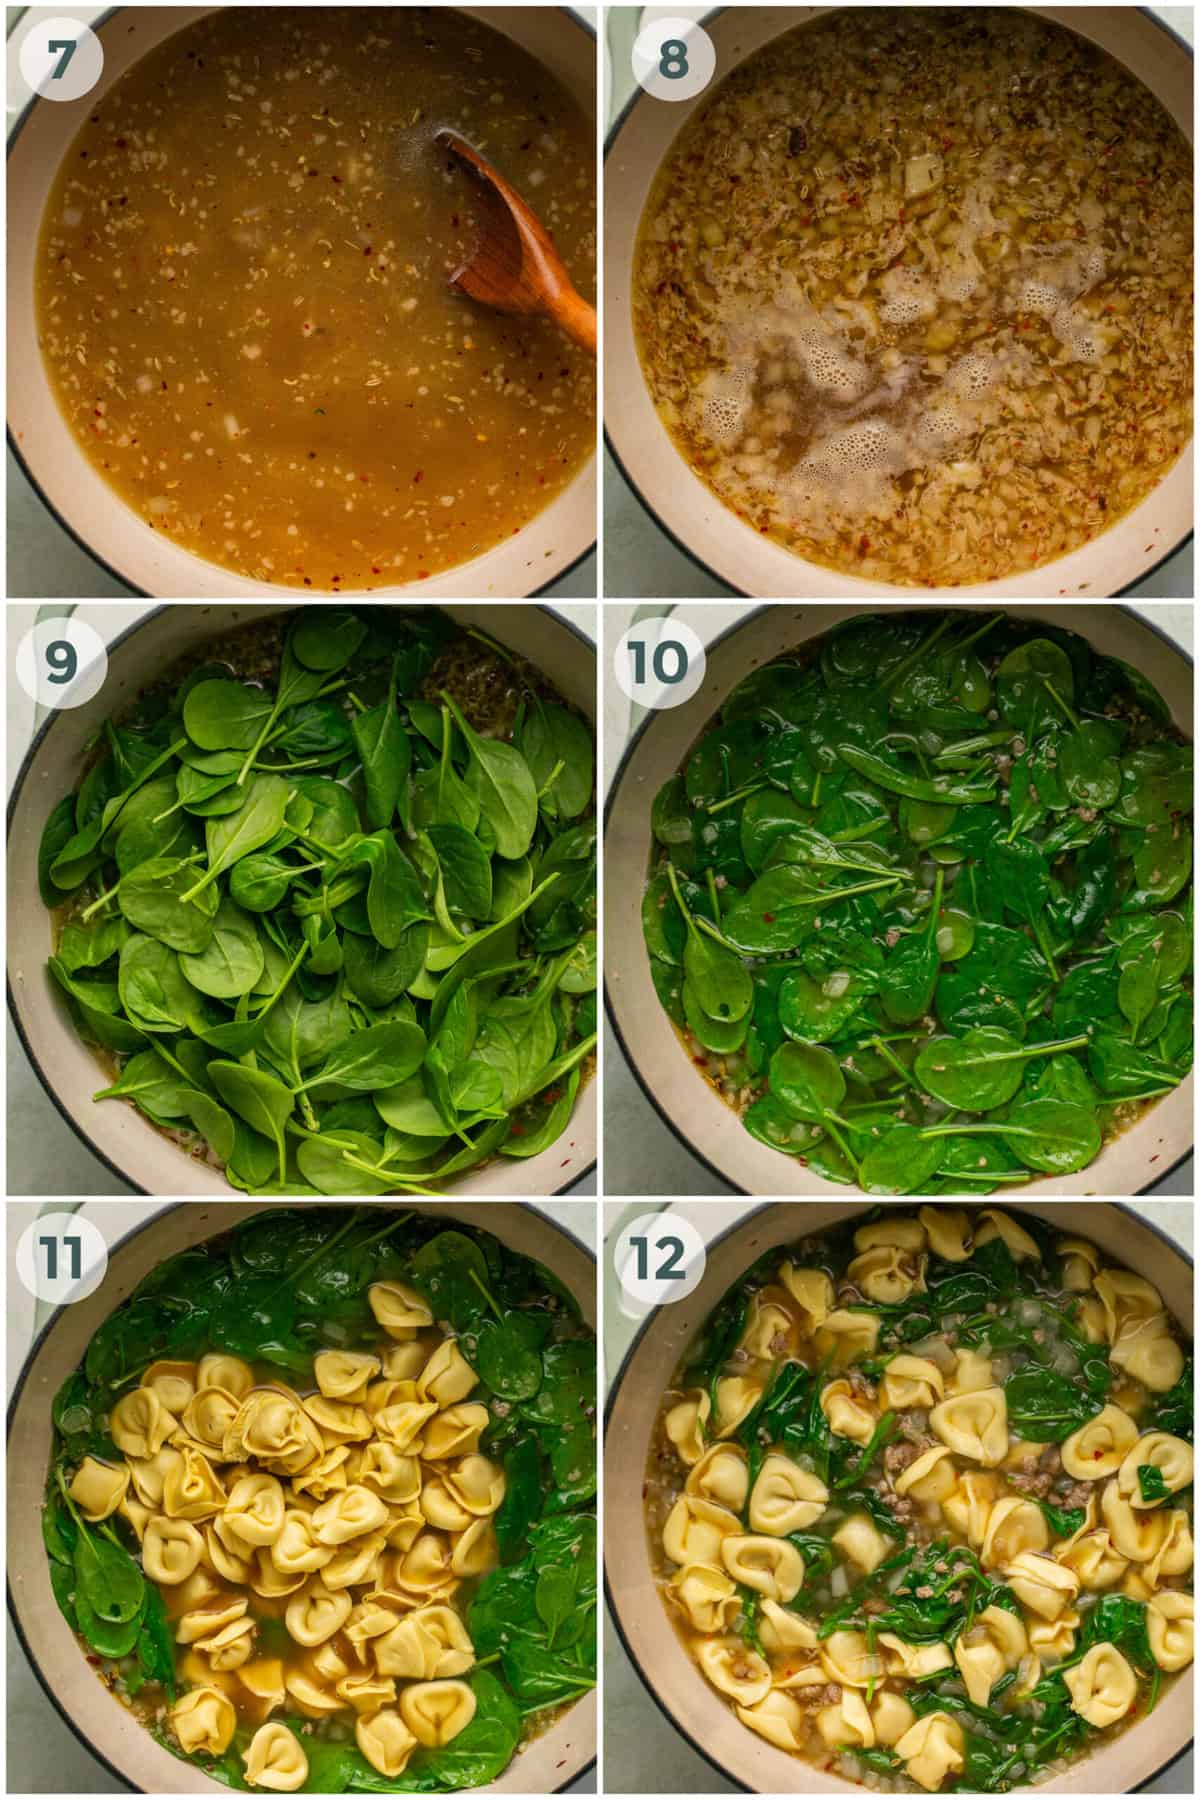 steps 7-12 for preparing sausage tortellini spinach soup